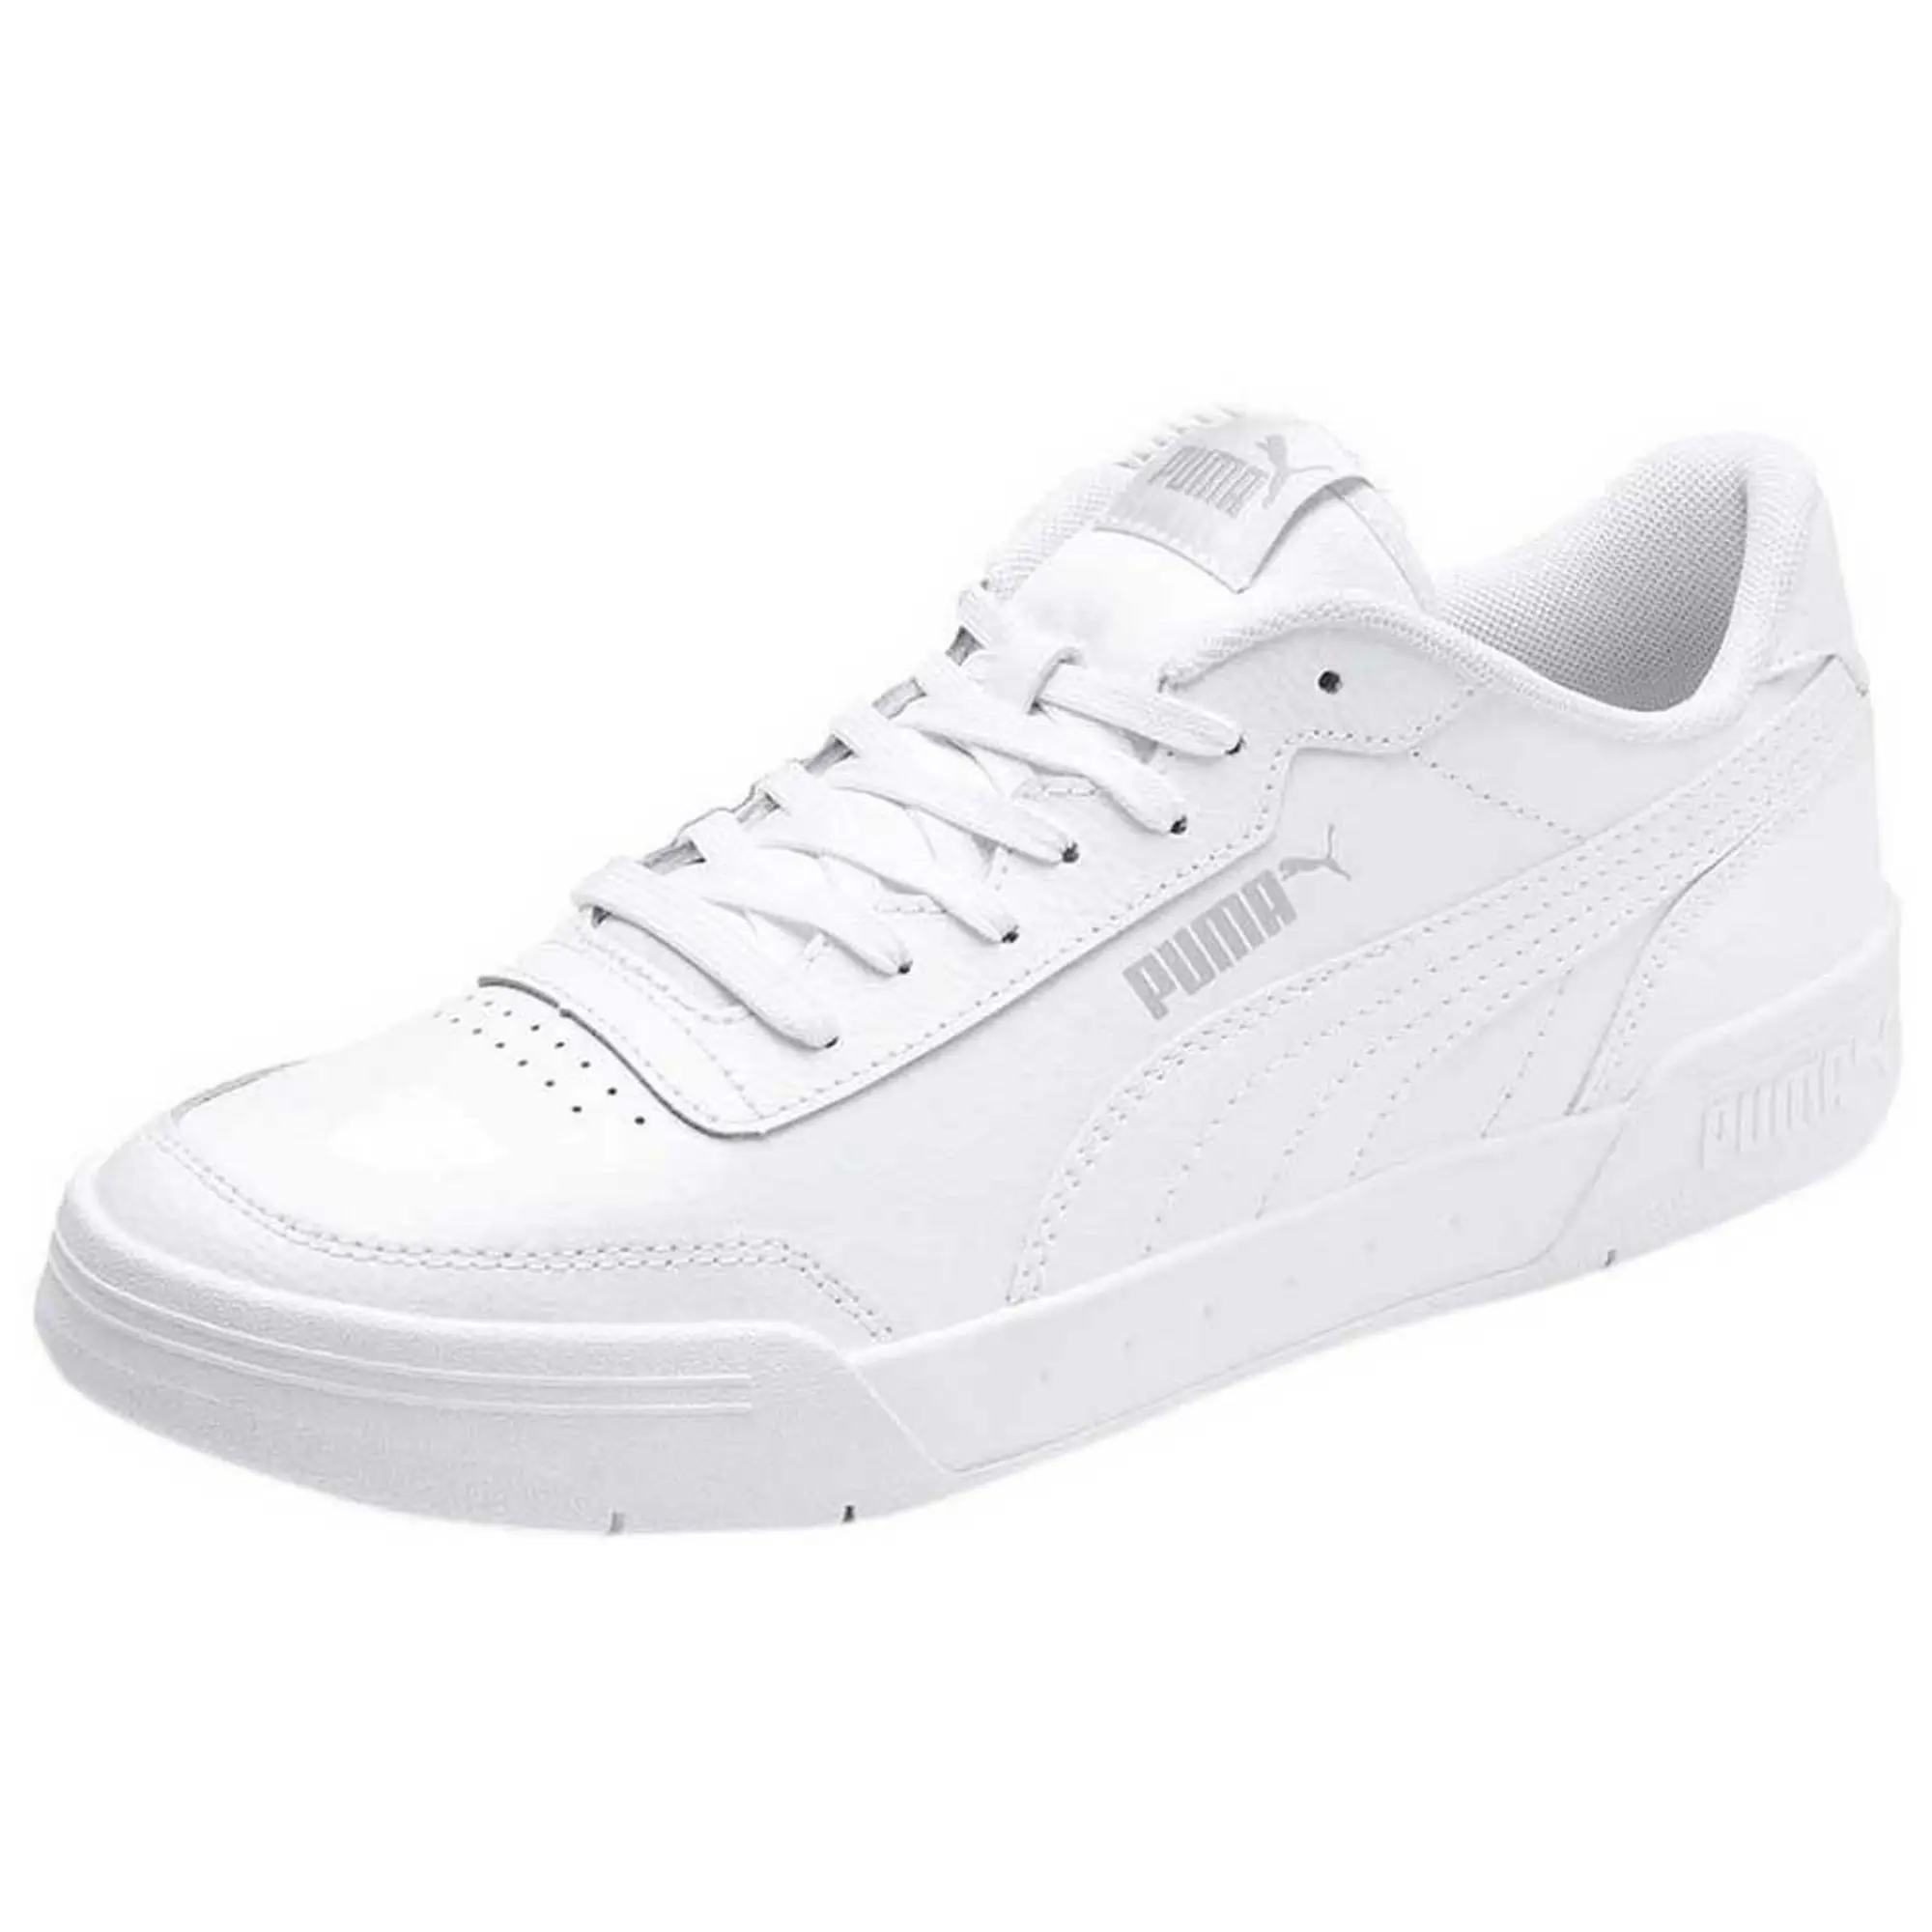 Puma Mens Caracal Trainers White/Silver